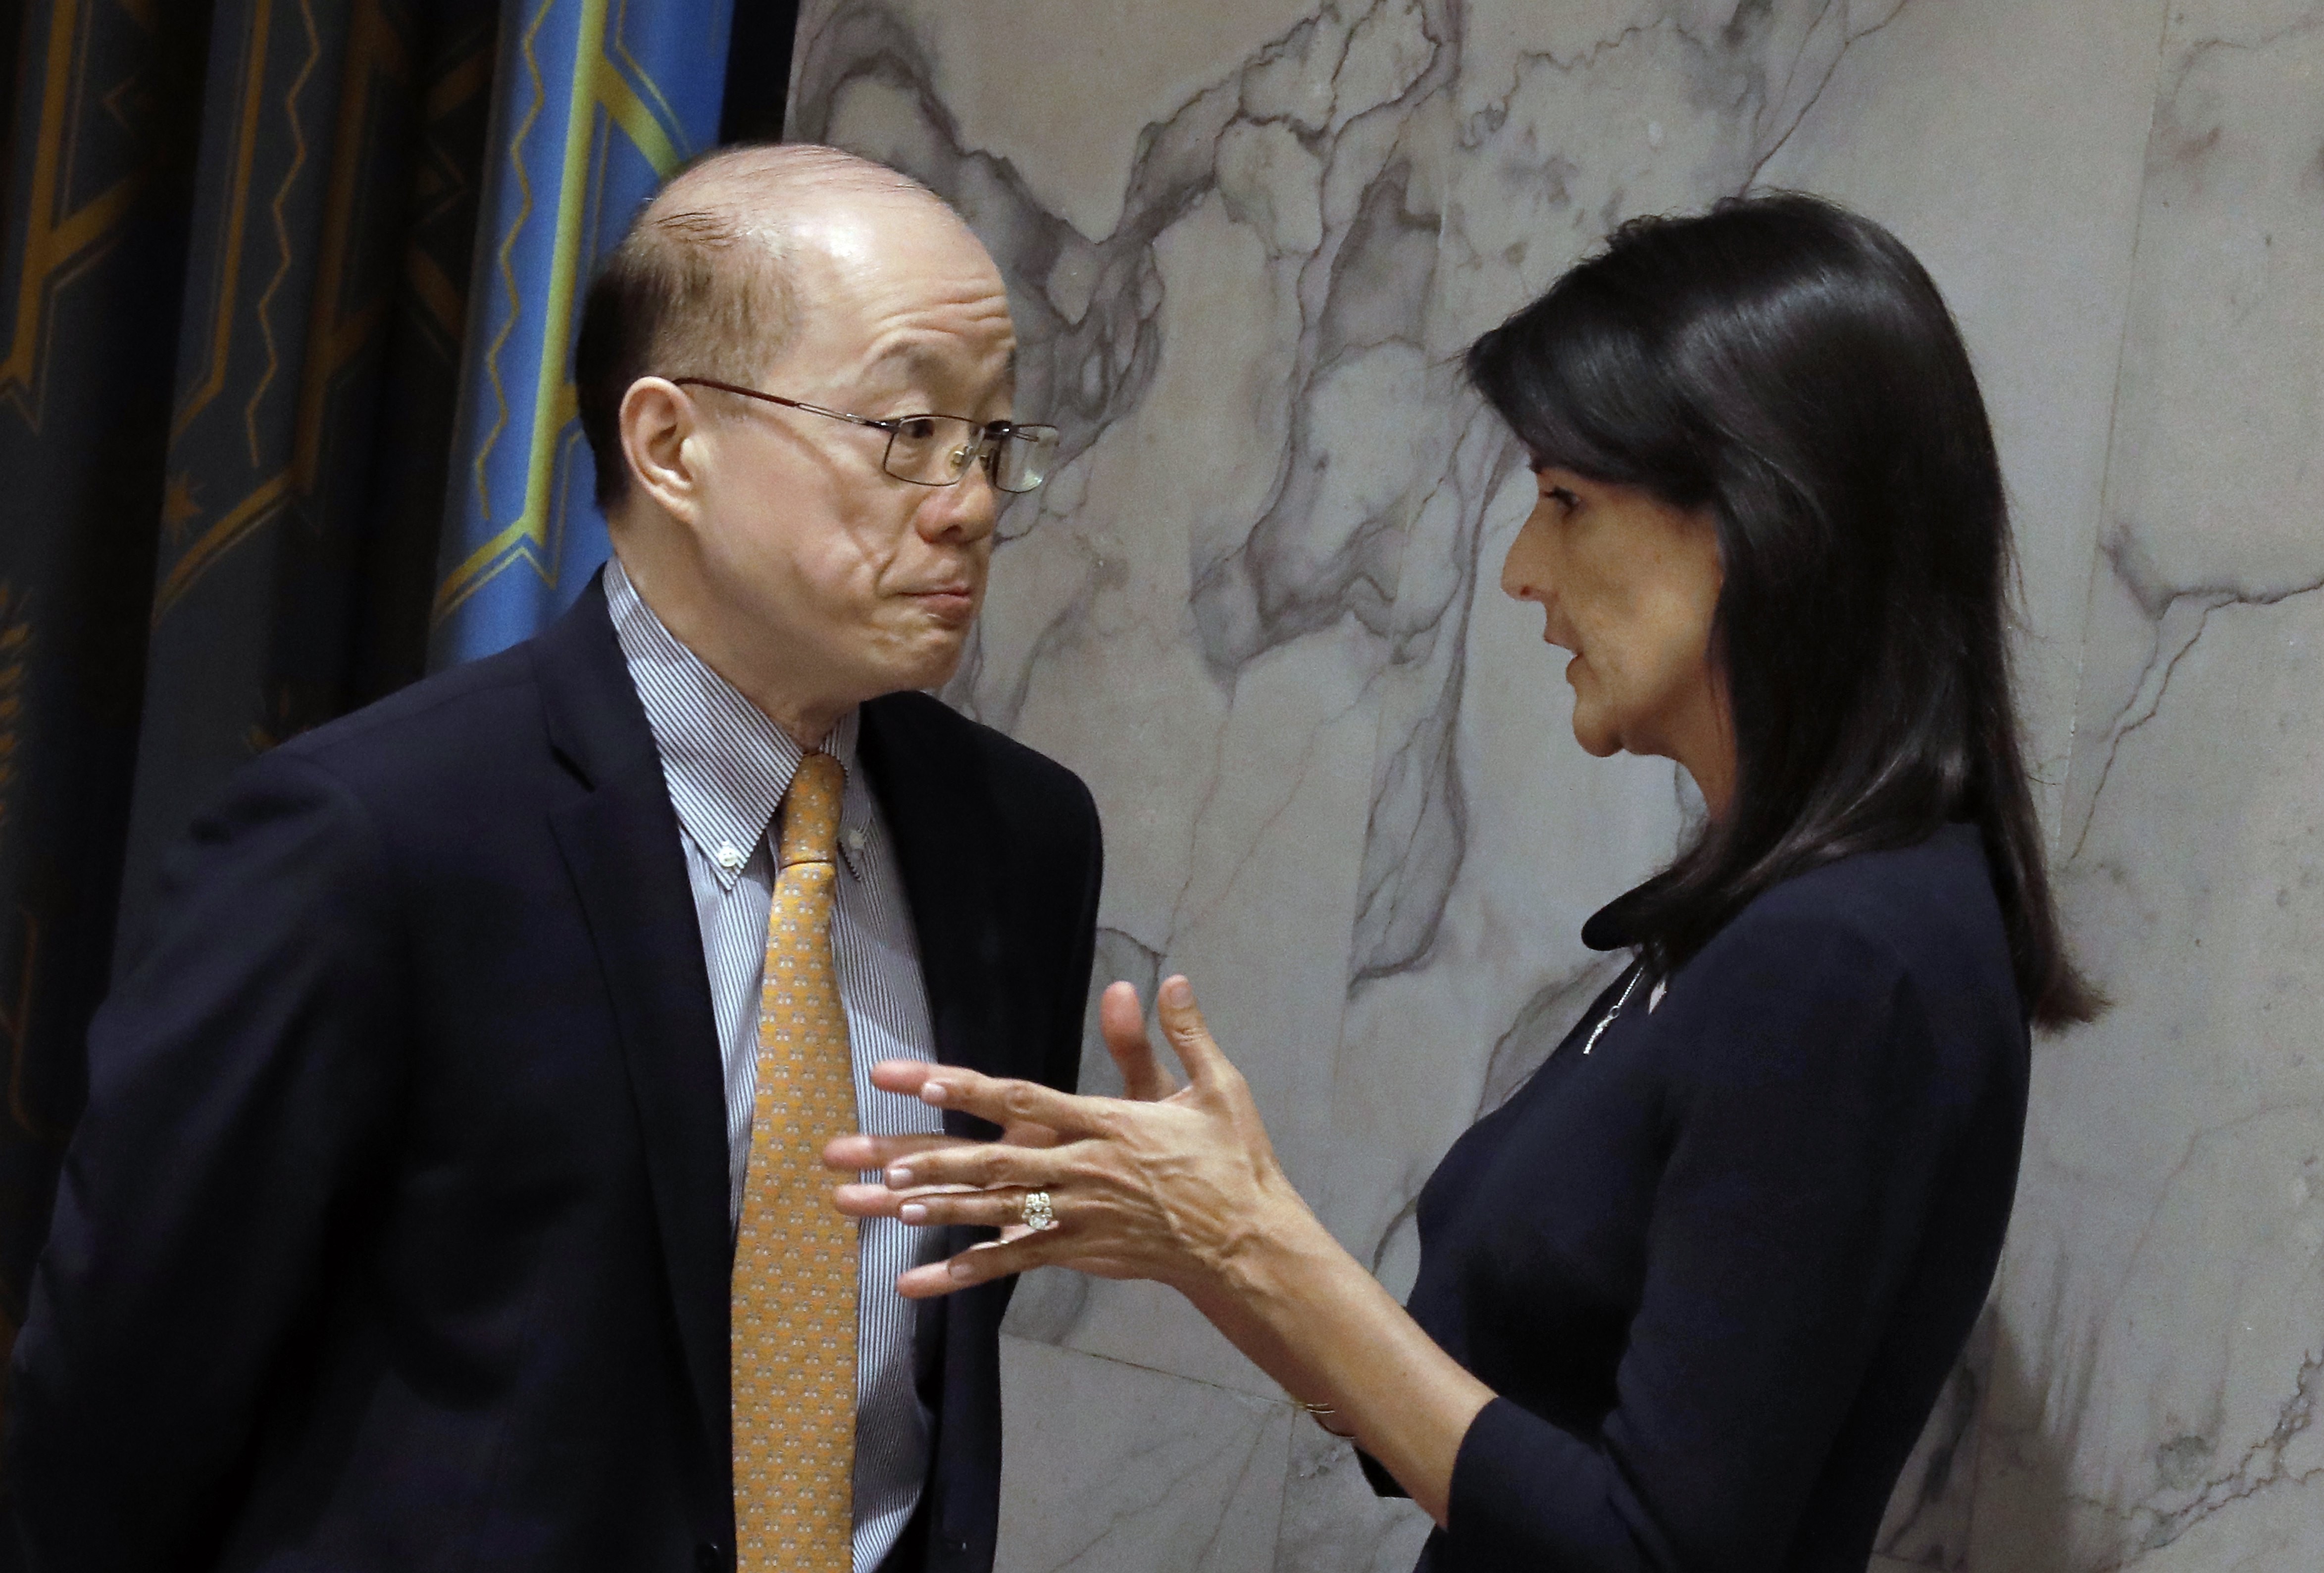 US Ambassador to the UN Nikki Haley speaks to UN Chinese Ambassador Liu Jieyi before a Security Council meeting on the situation in North Korea, at the UN headquarters in New York on September 4. Photo: EPA-EFE